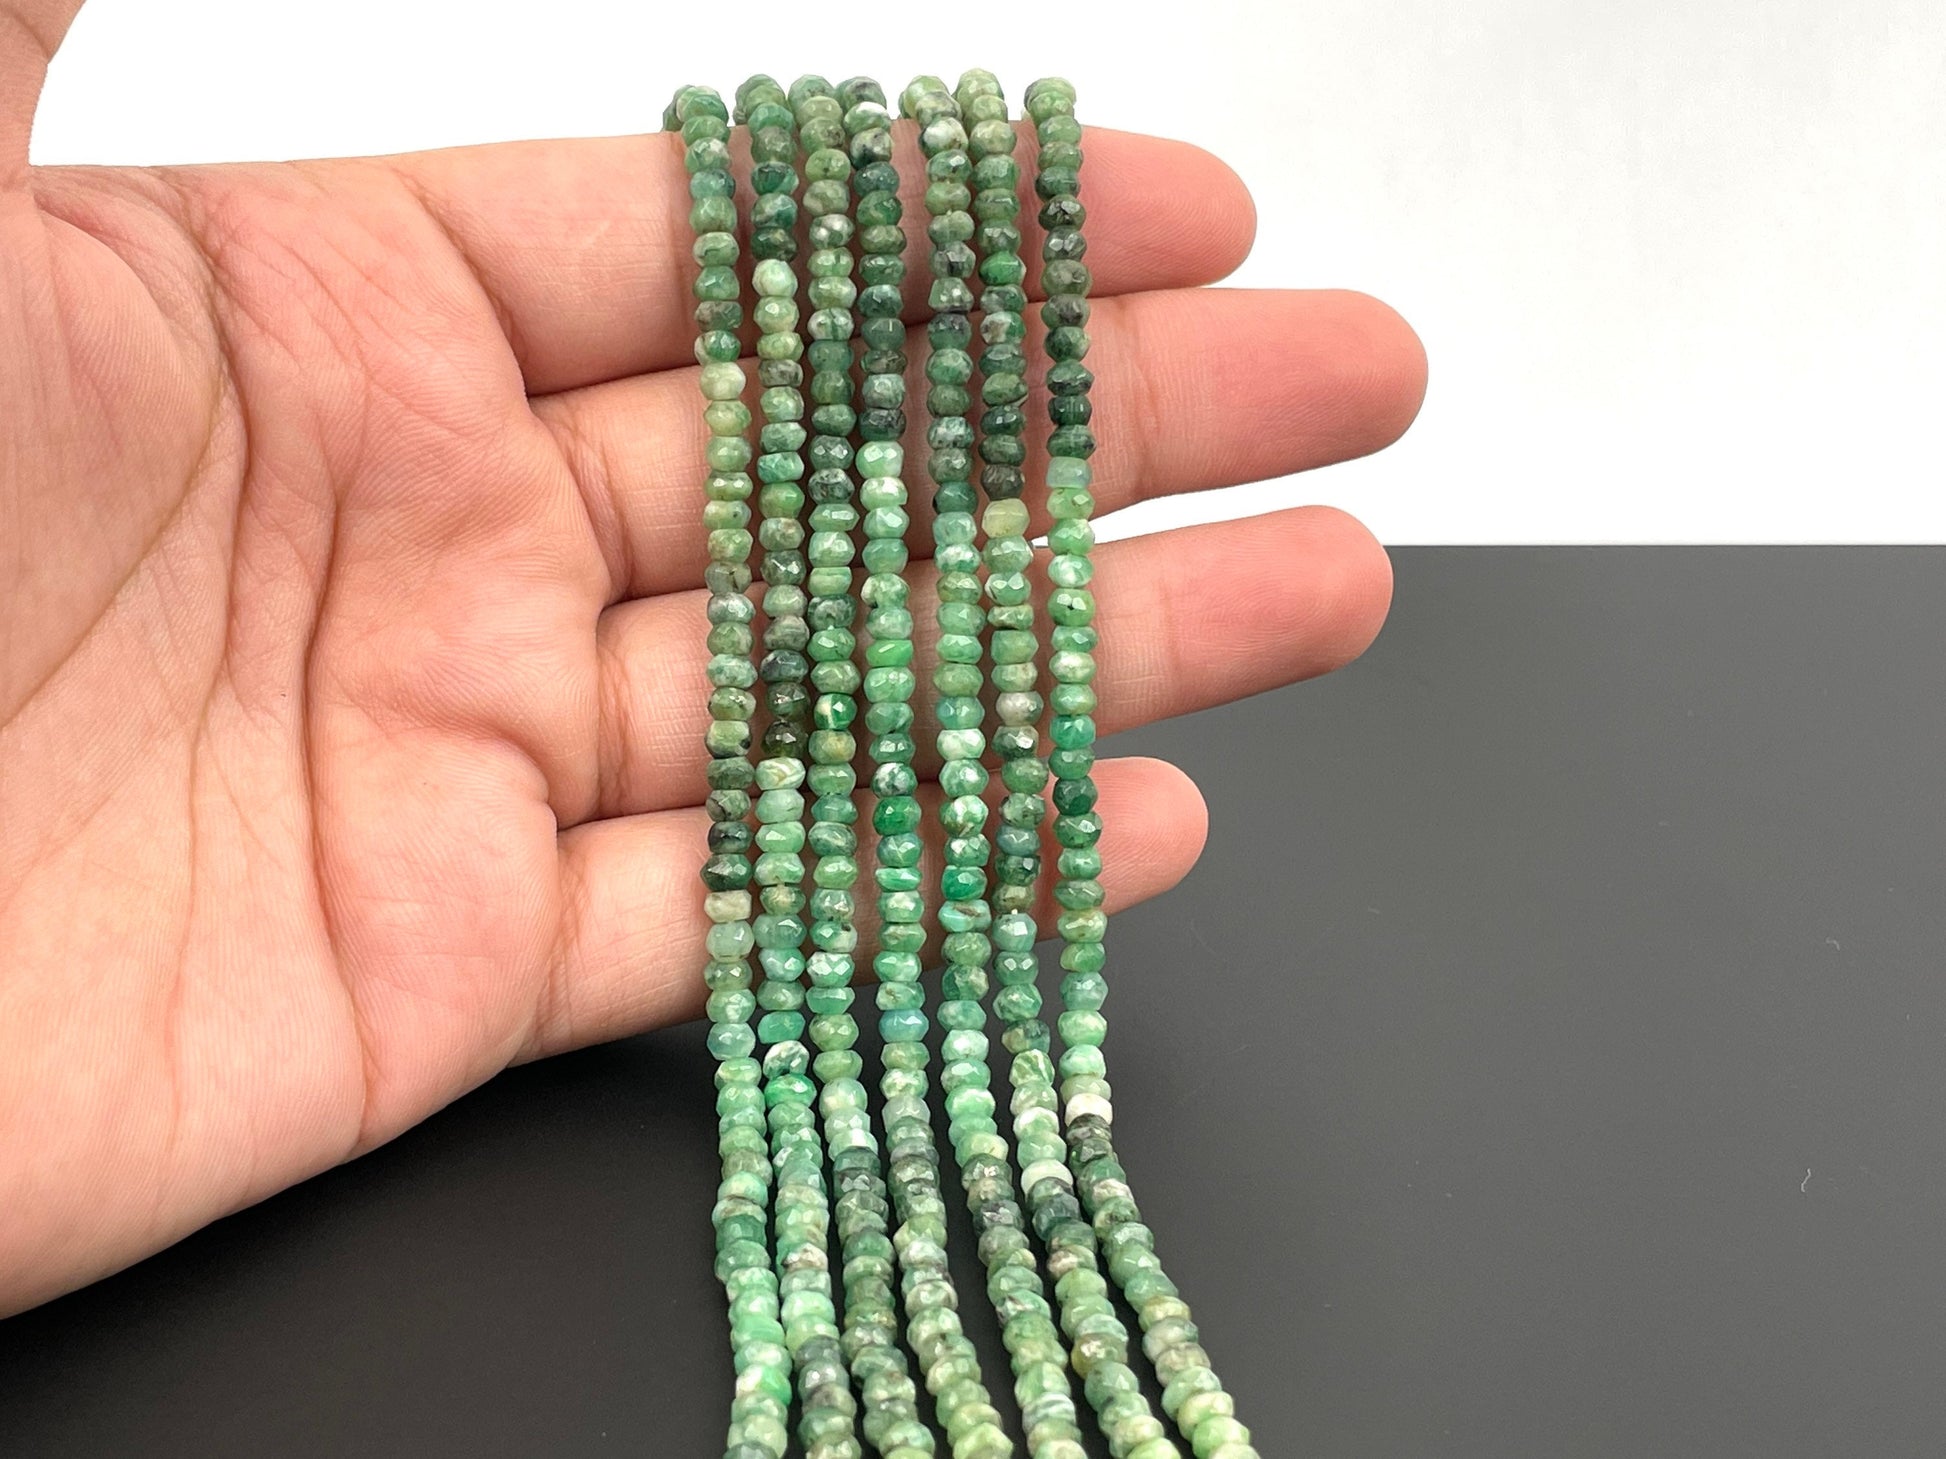 Emerald Faceted Rondelle Beads